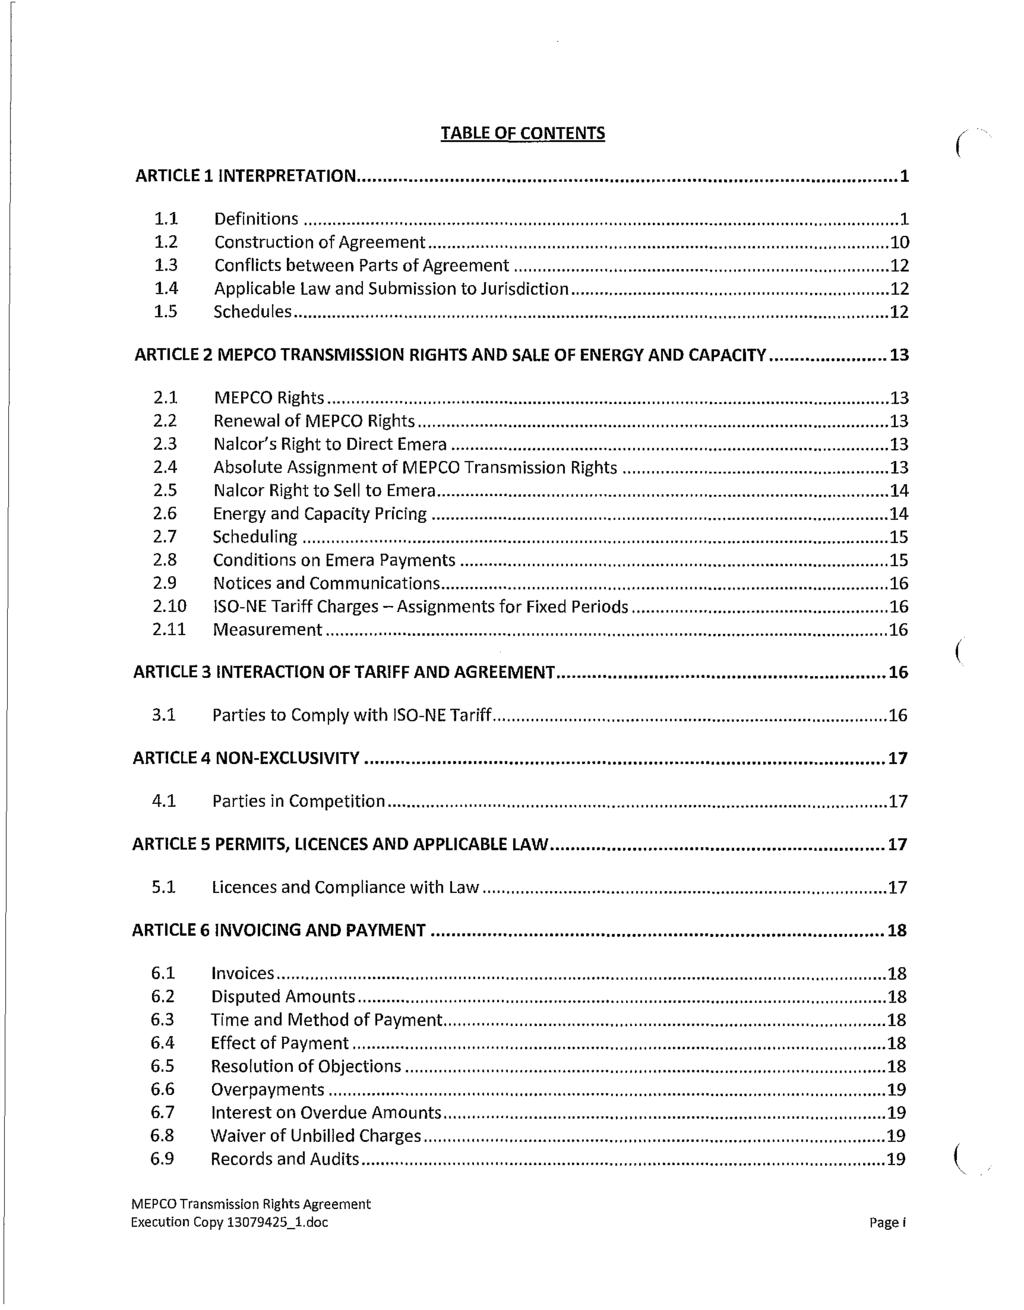 Maritime Link Appendix 2.08 Page 2 of 108 TABLE OF CONTENTS ARTICLE 11NTERPRETATION... 1 1.1 Definitions... 1 1.2 Construction of Agreement... 10 1.3 Conflicts between Parts of Agreement... 12 1.